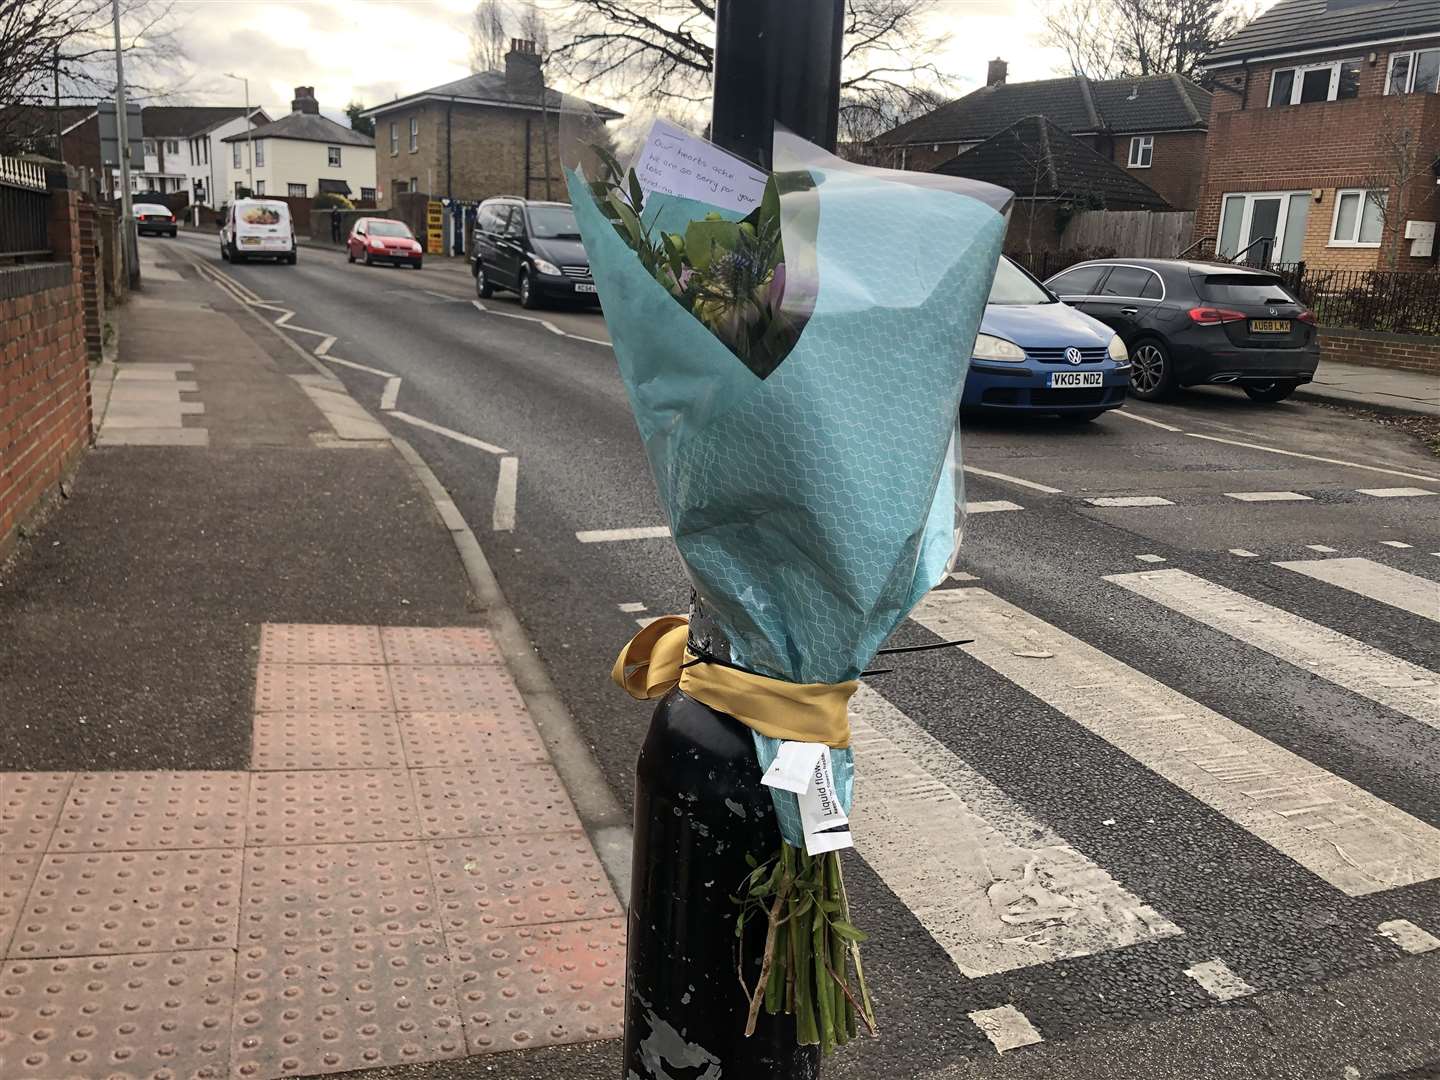 Floral, candle and basketball tributes have been laid for Szymon